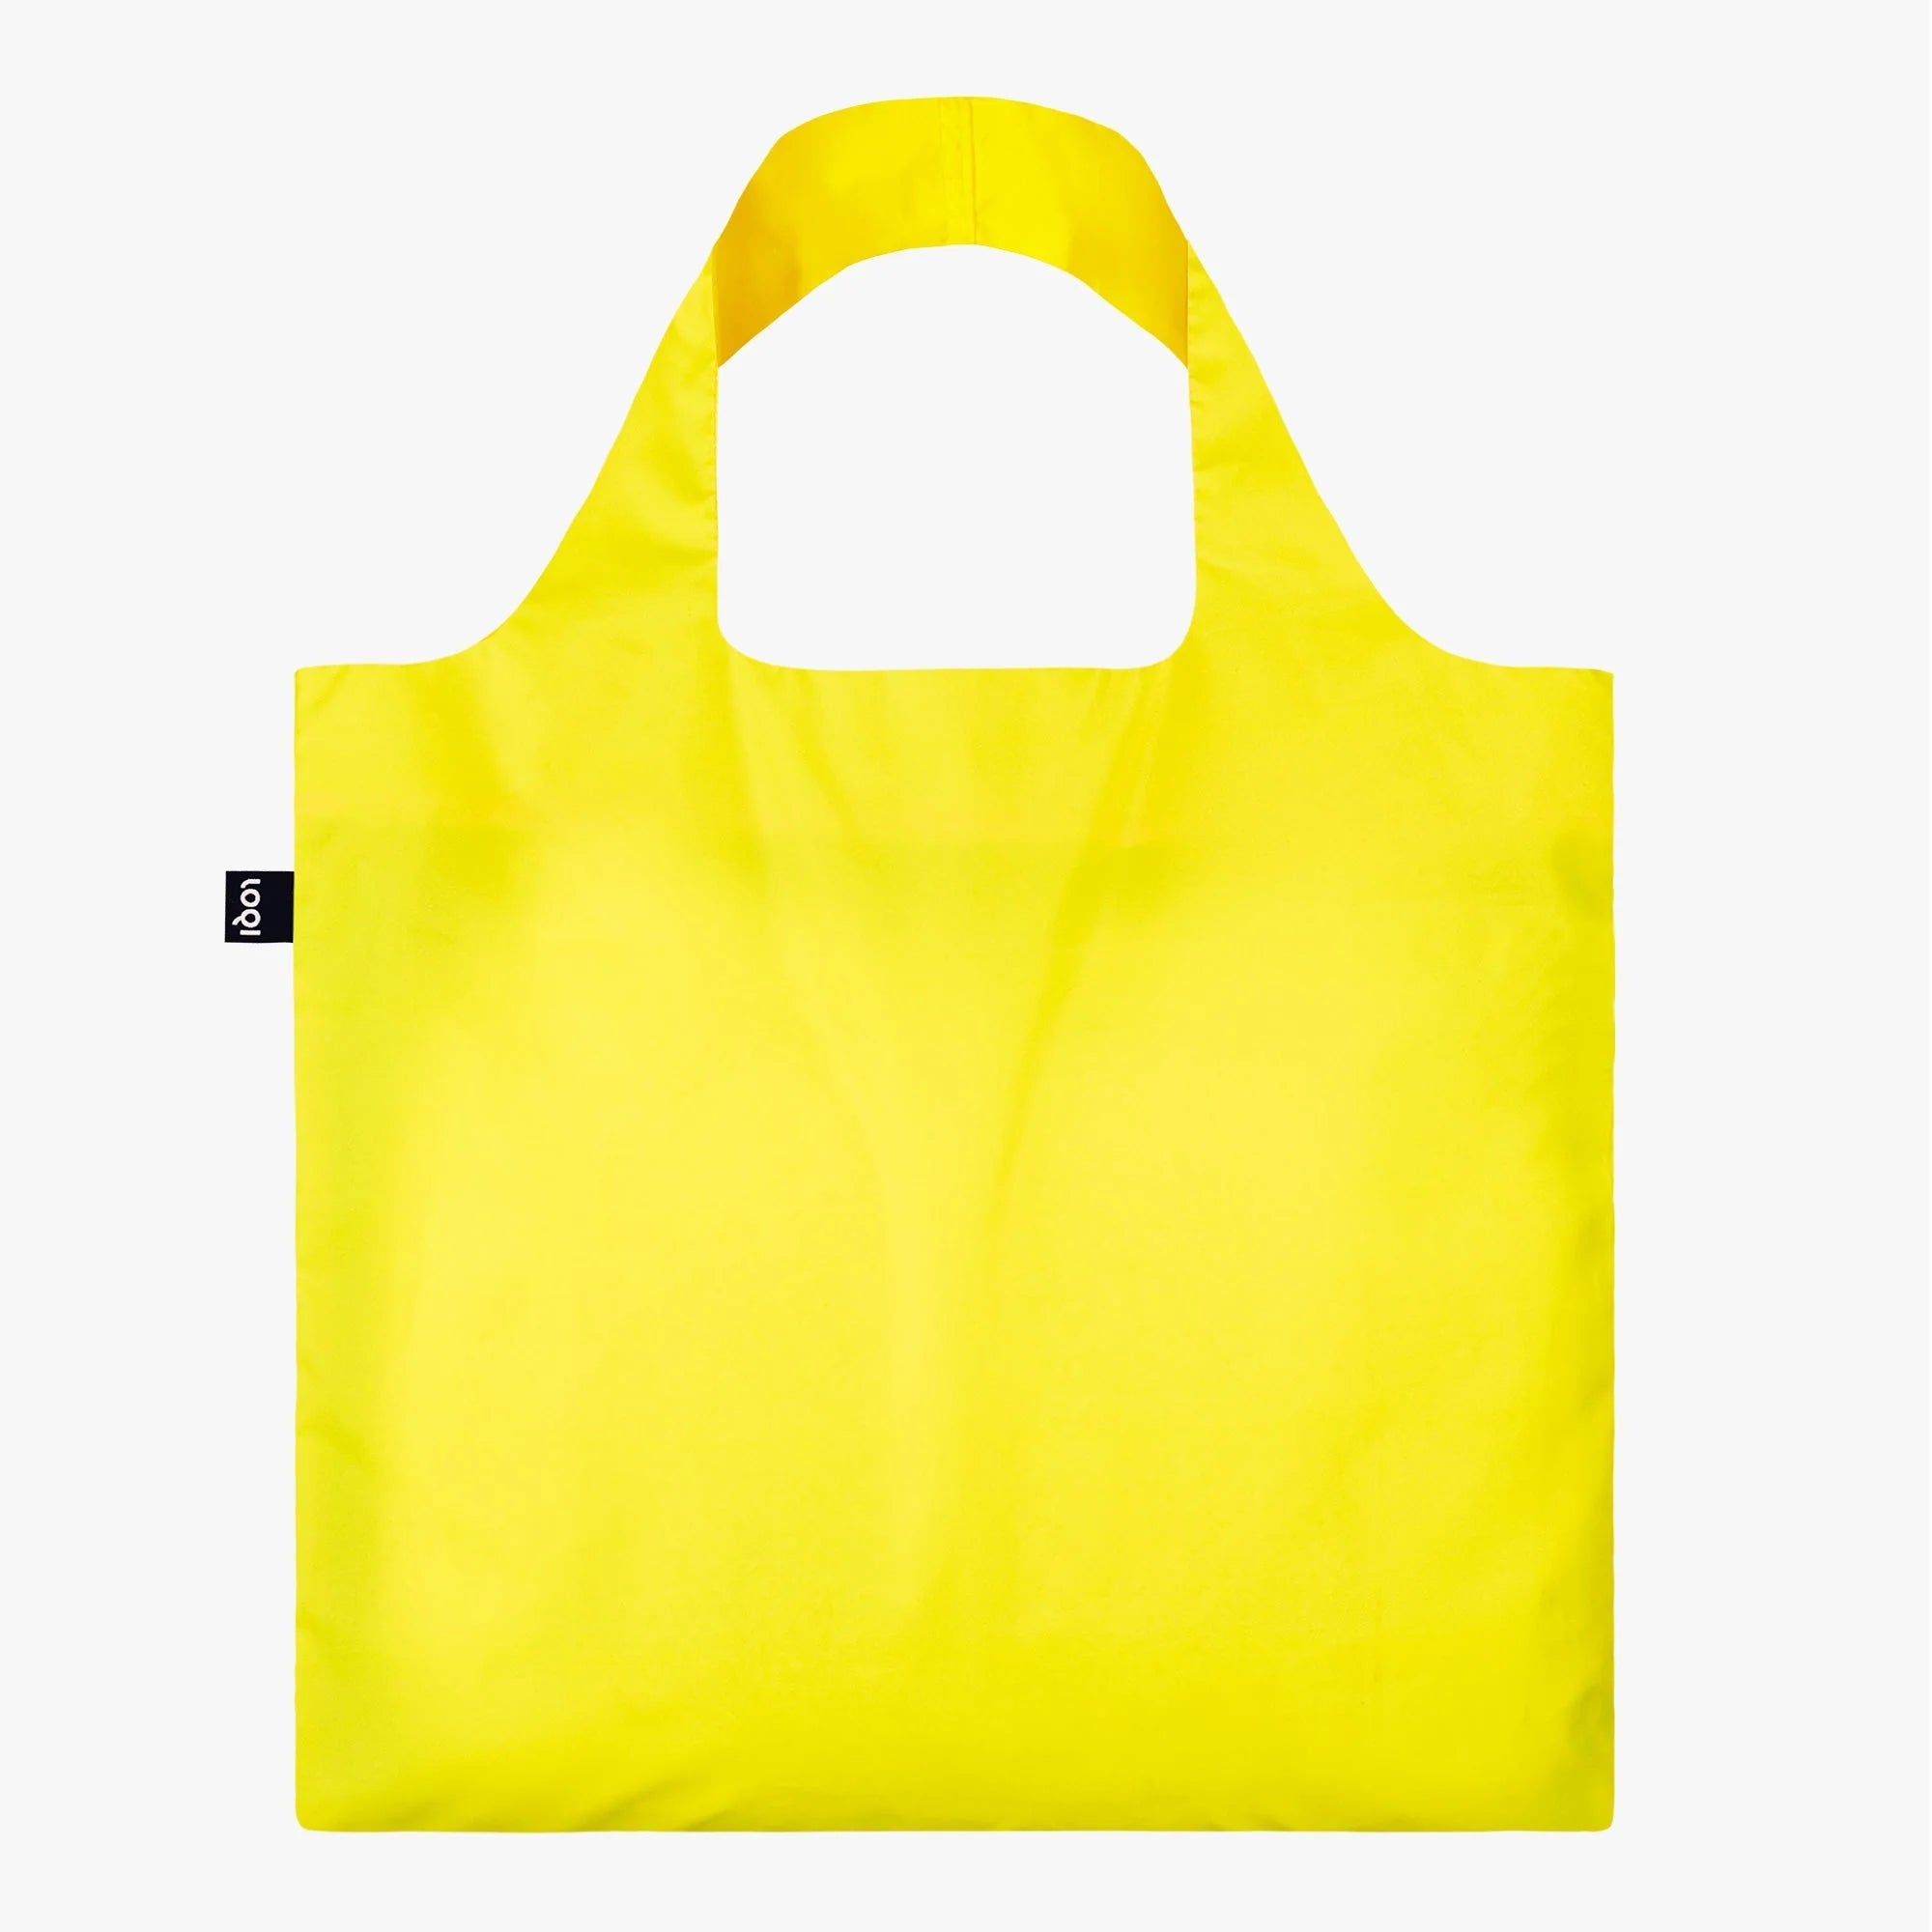 Sustainable Living Loqi Neon Yellow Recycled Bag by Weirs of Baggot Street